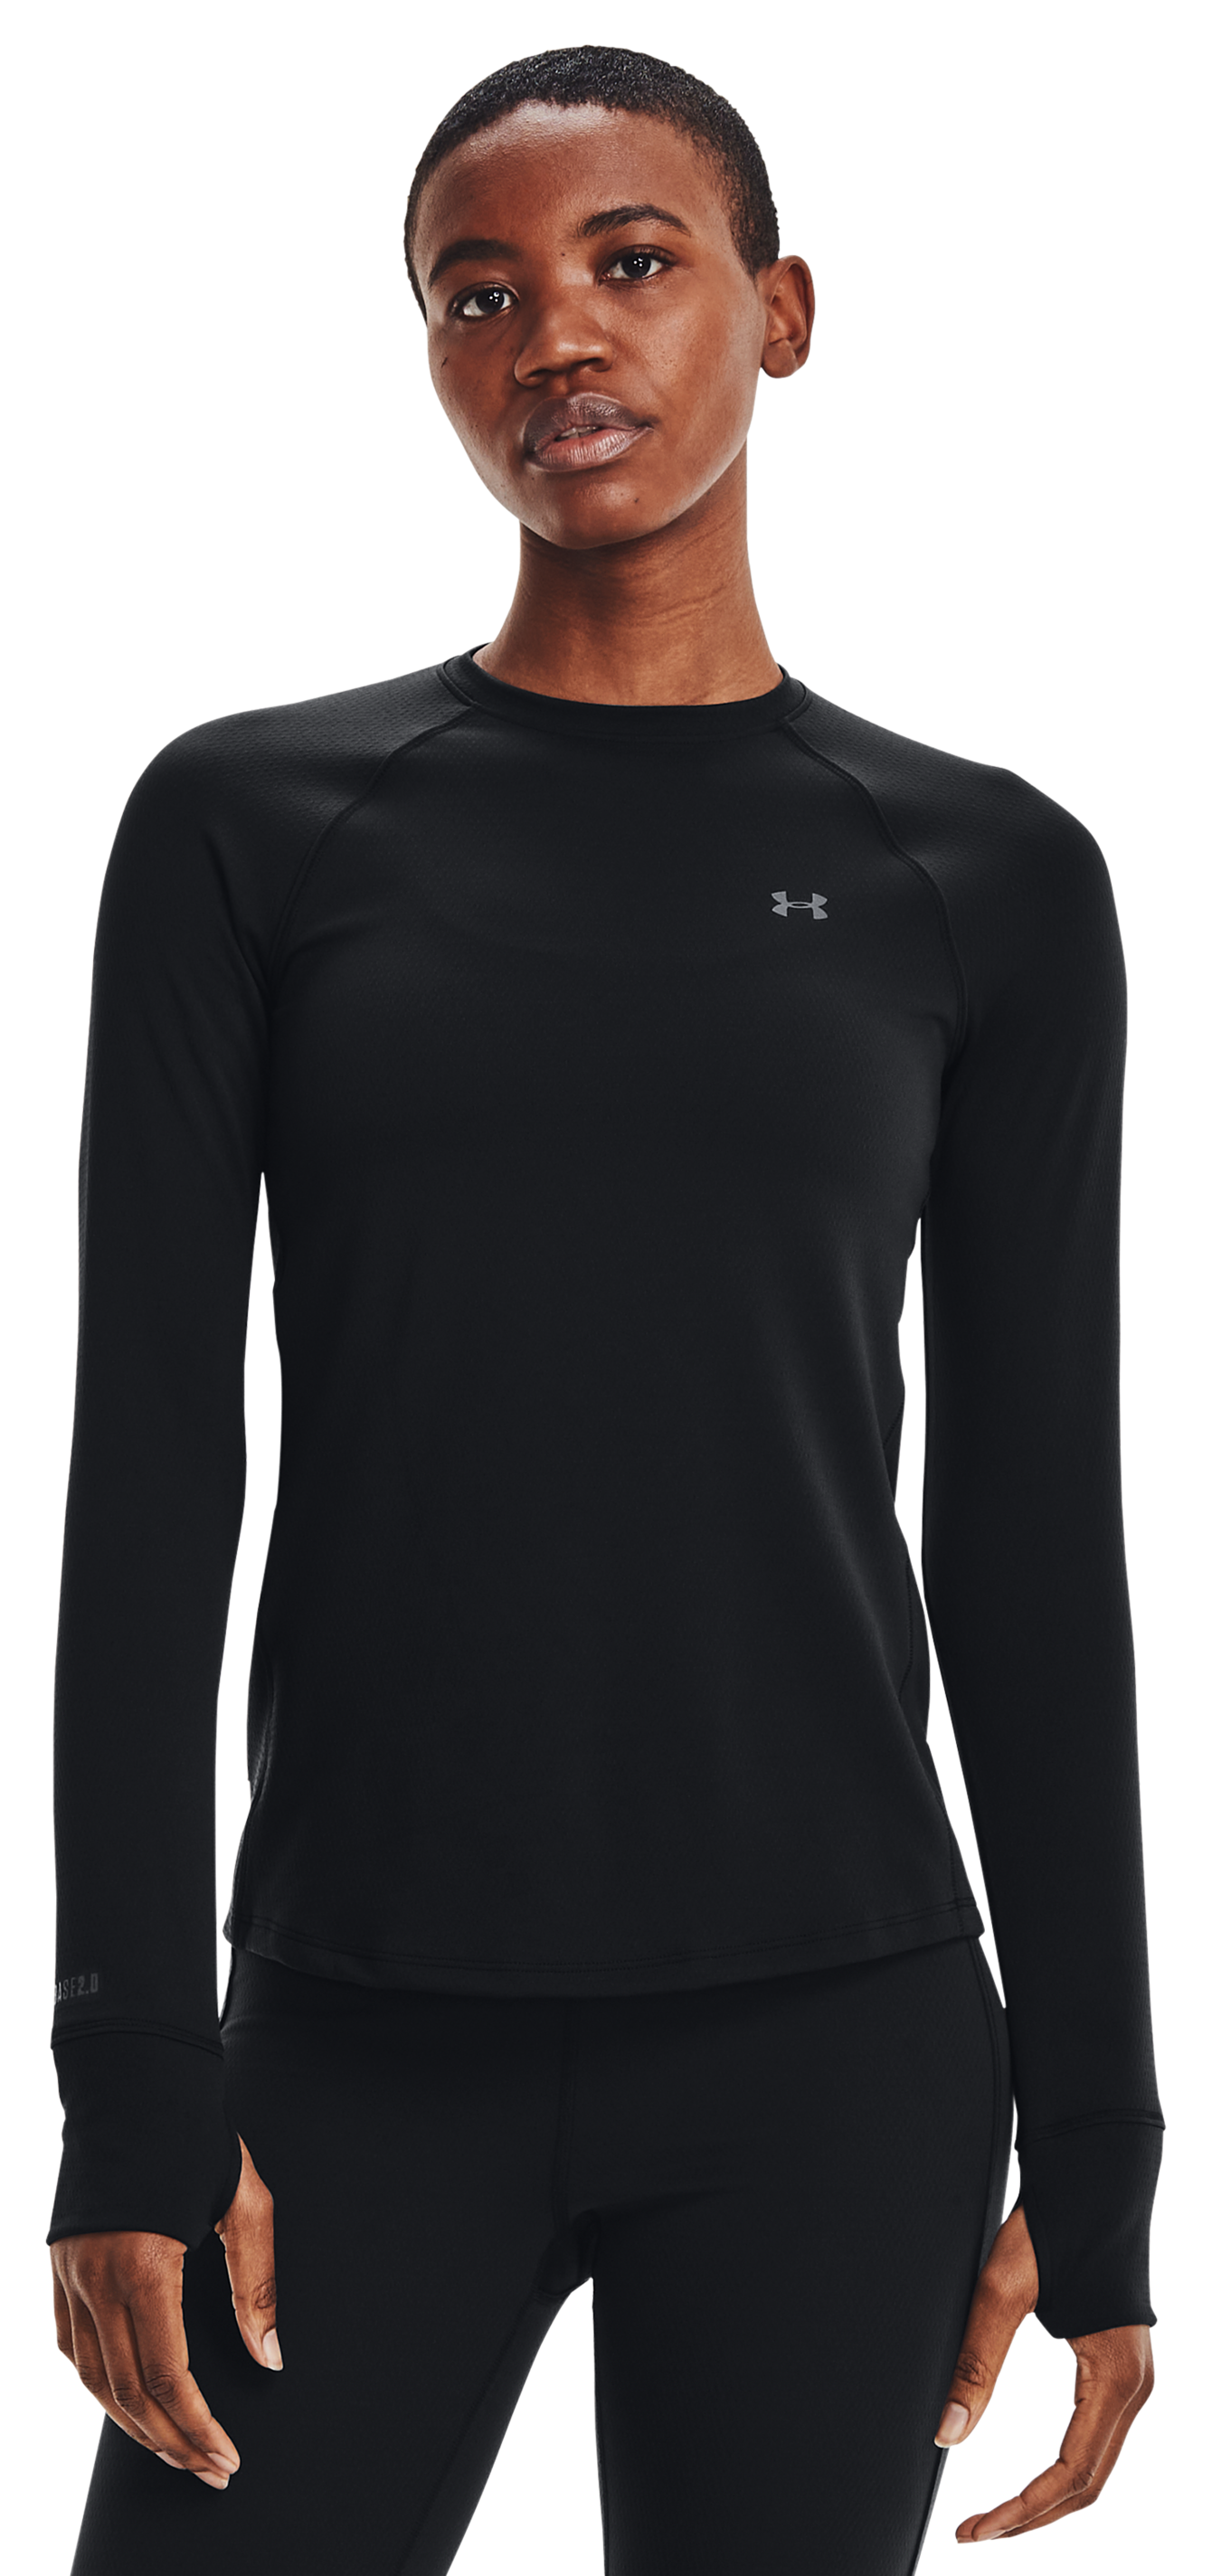 Under Armour ColdGear Infrared Long-Sleeve Hoodie for Ladies